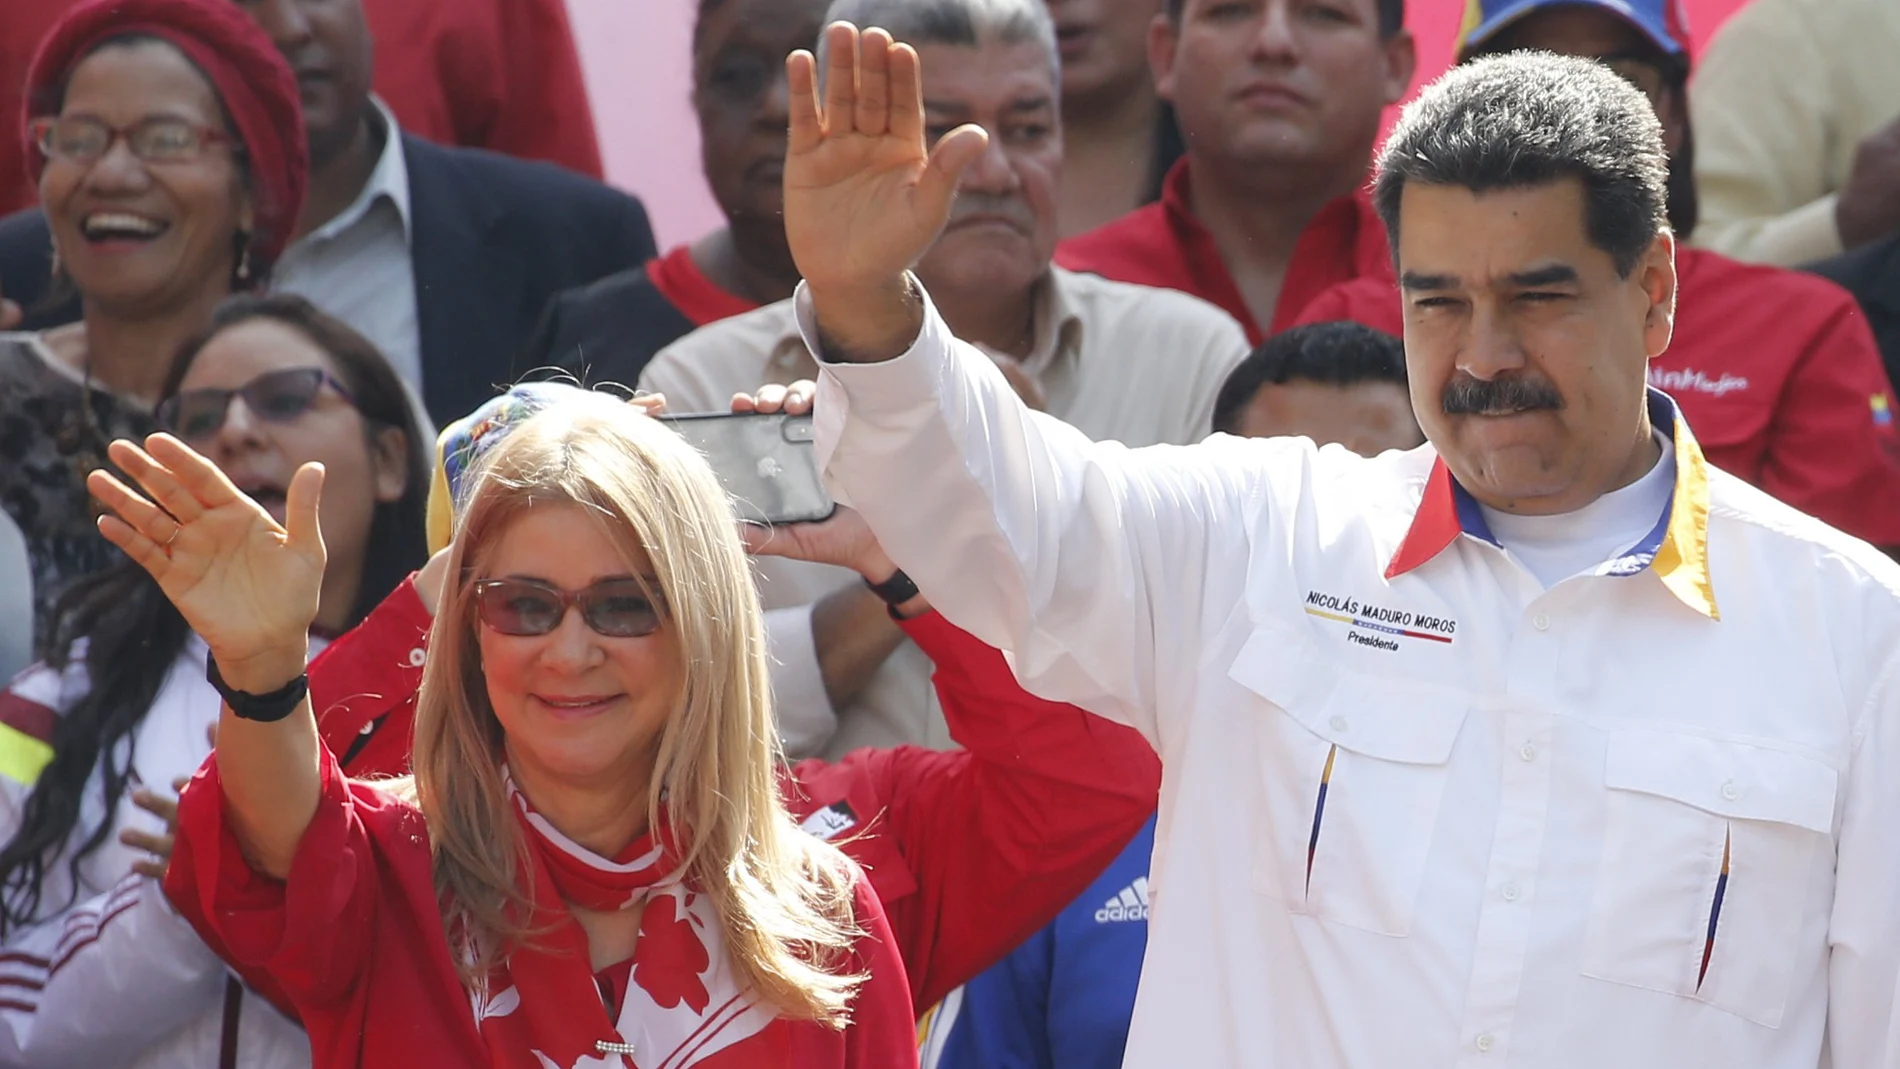 FILE - In this May 20, 2109 file photo, Venezuela's President Nicolas Maduro and his wife Cilia Flores wave to supporters outside Miraflores presidential palace in Caracas, Venezuela. A nephew of Venezuelaâ€™s first lady appealed on Tuesday, Aug. 25, 2020, to the U.S. Supreme Court an 18-year sentence for conspiring to smuggle 800 kilograms of cocaine into the U.S. (AP Photo/Ariana Cubillos, File)